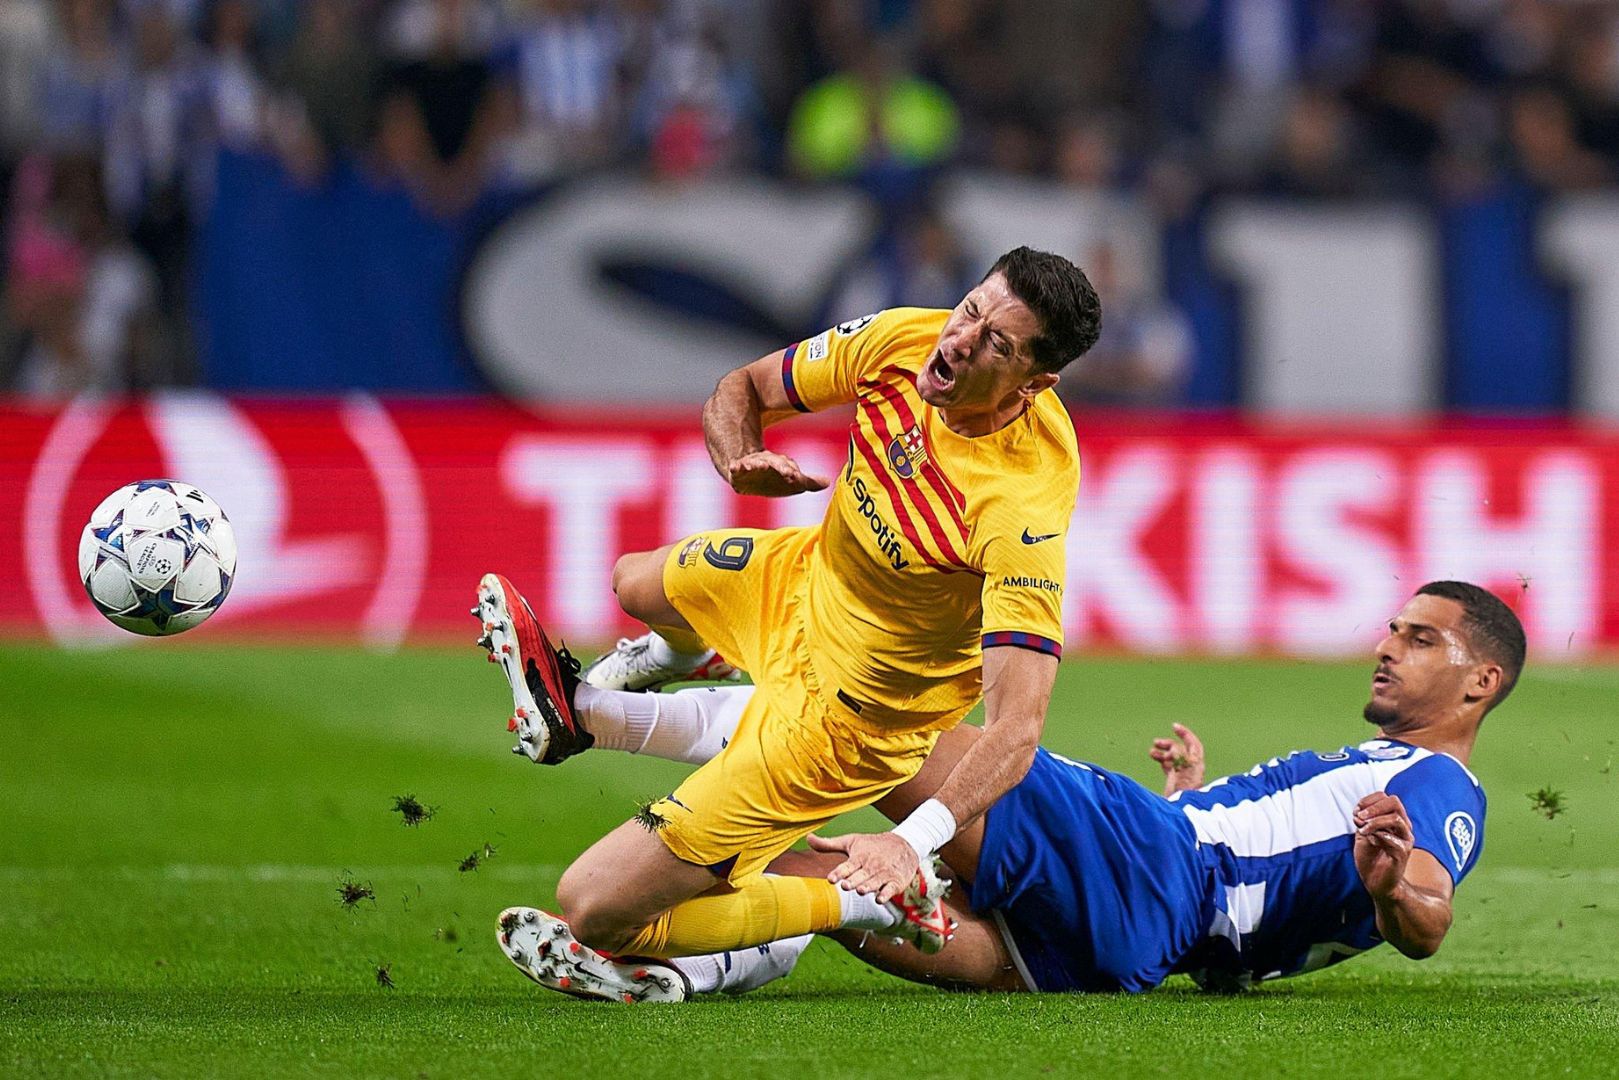 David Carmo of FC Porto competes for the ball with Robert Lewandowski of FC Barcelona during the UEFA Champions League match between FC Porto and FC Barcelona at Estadio do Dragao